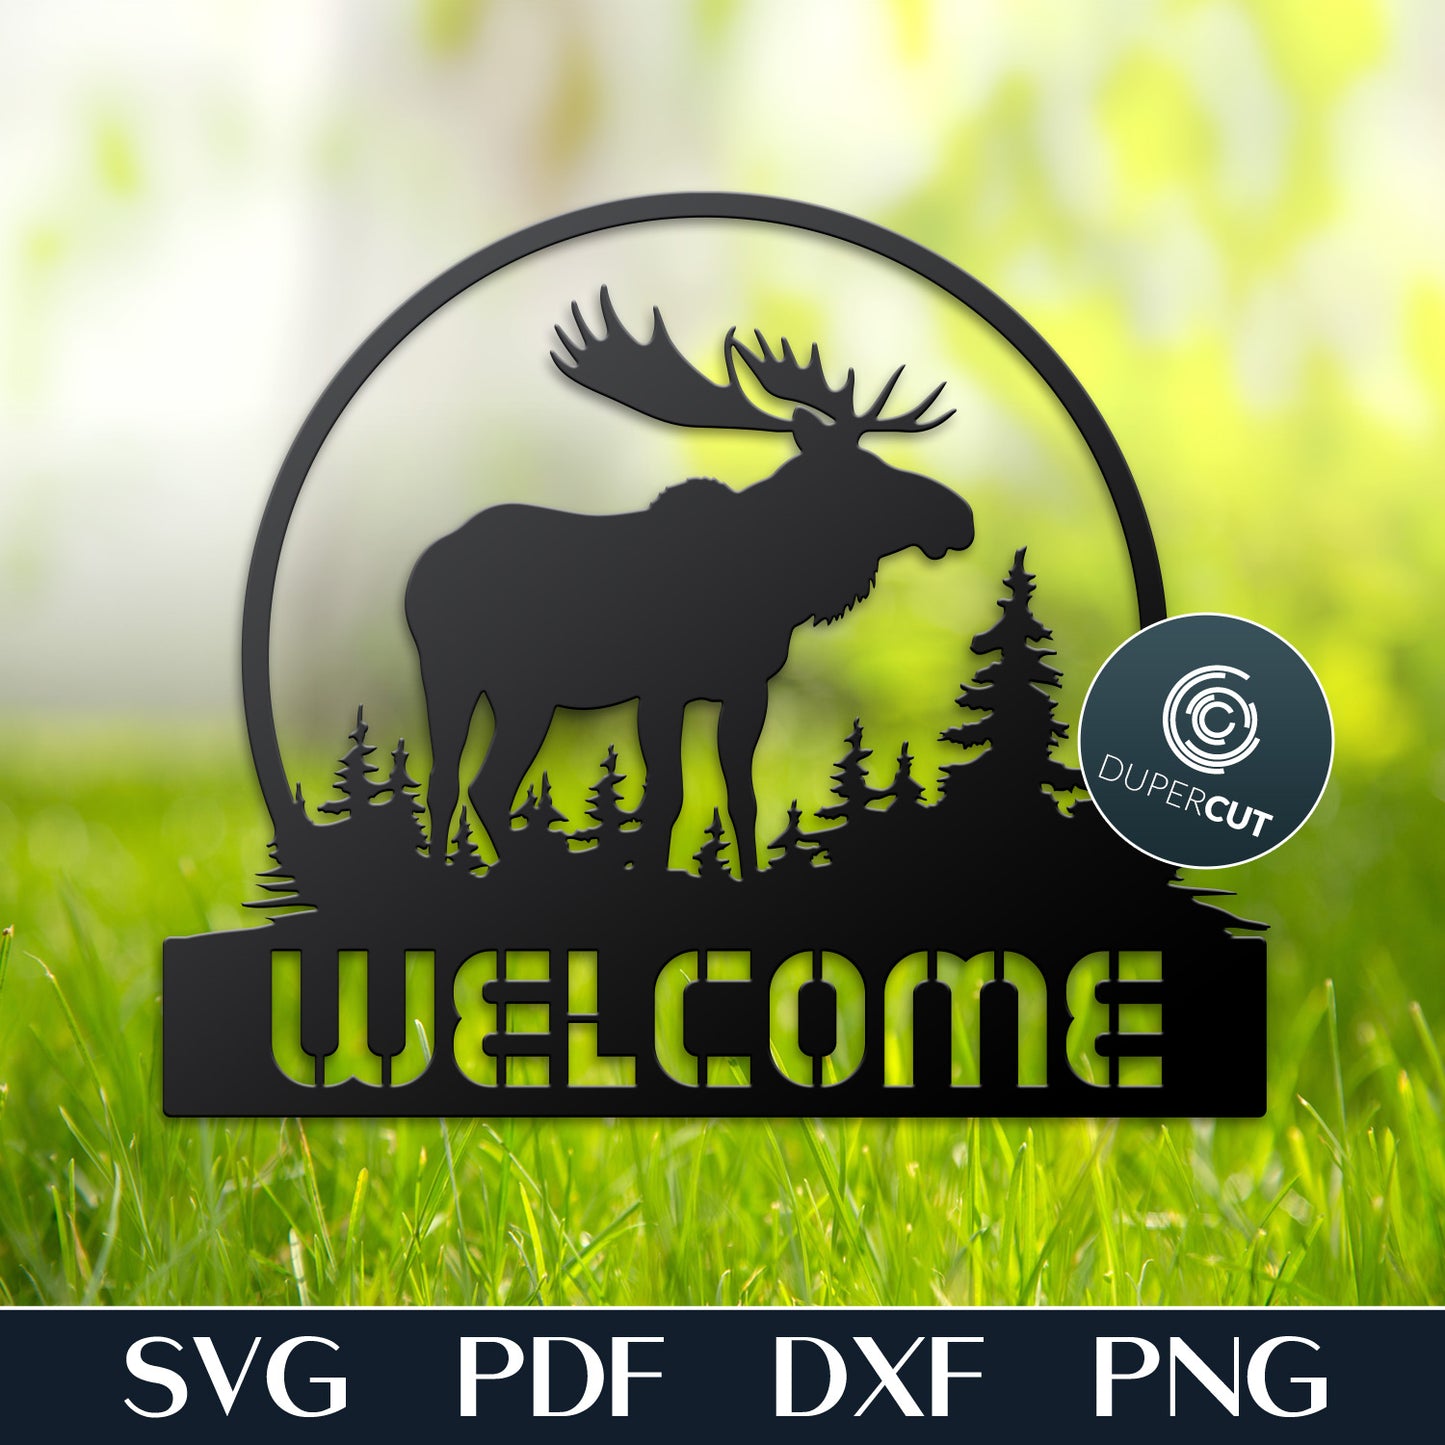 Moose in the woods wilderness welcome sign - SVG DXF vector template for Glowforge, Cricut, X-tool, cnc plasma machines, scroll saw pattern by www.DuperCut.com